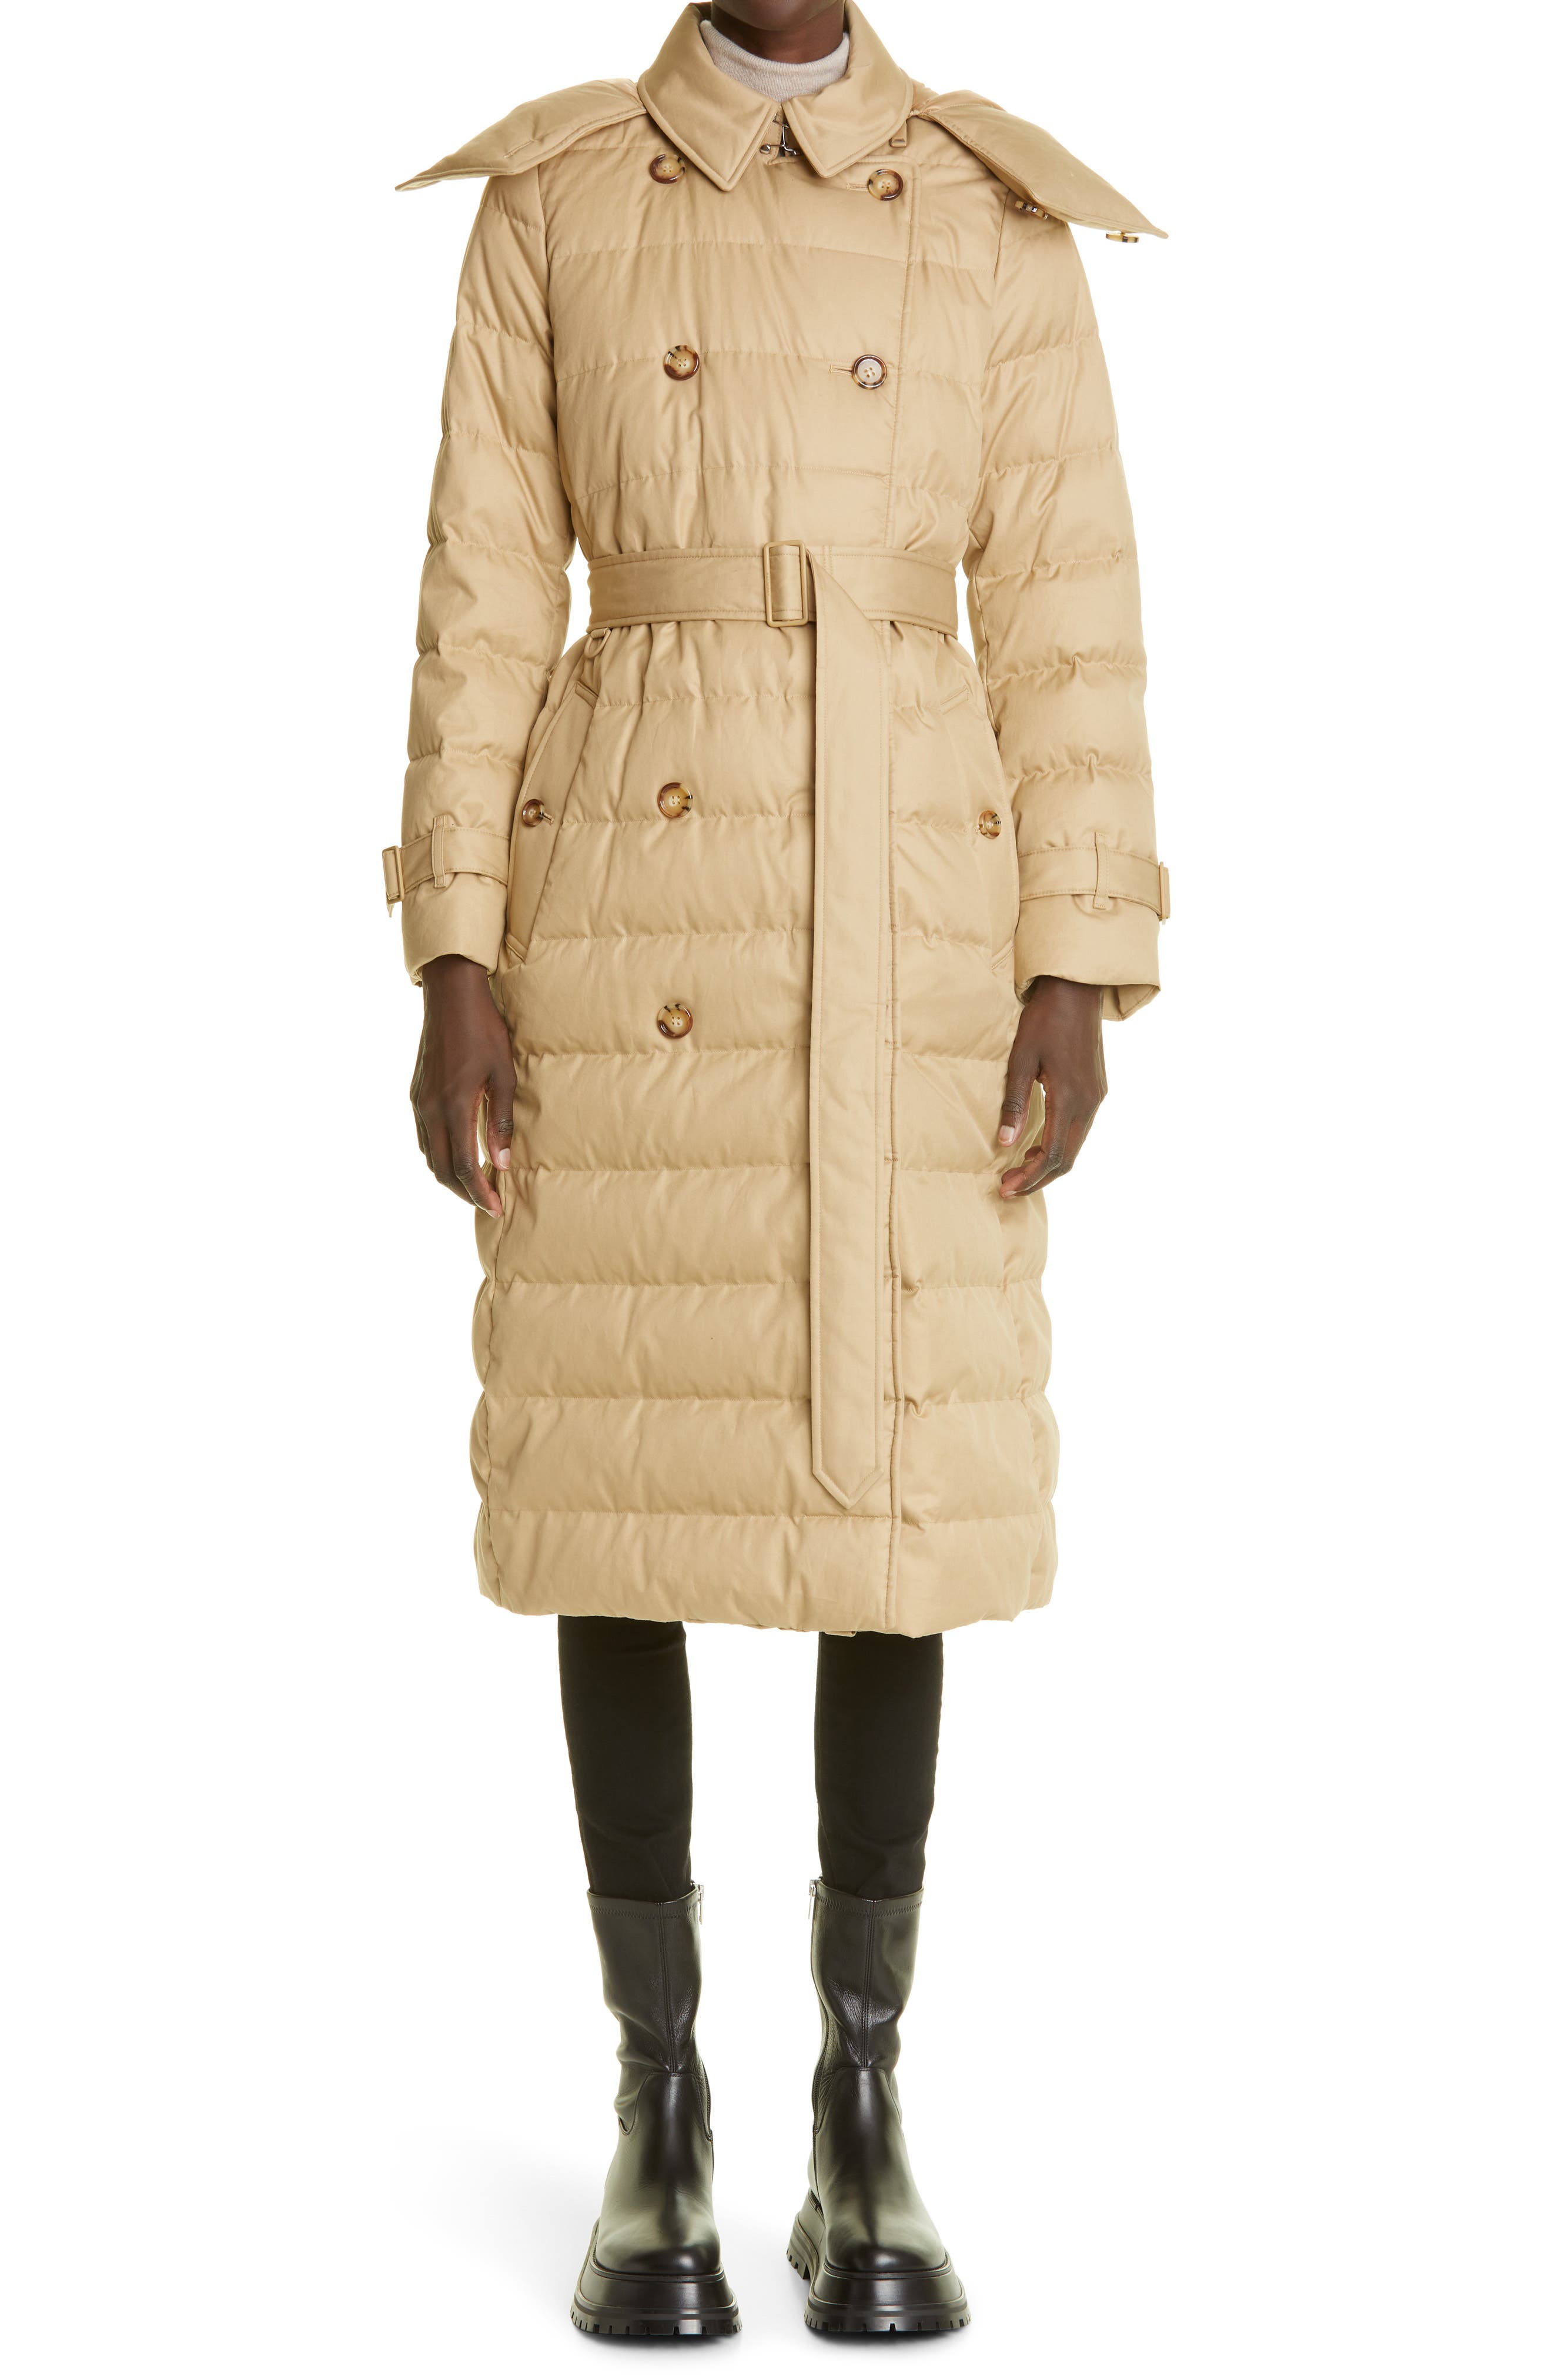 Burberry Ashwick Double Breasted Quilted Down Coat with Removable Hood in Honey at Nordstrom, Size Medium